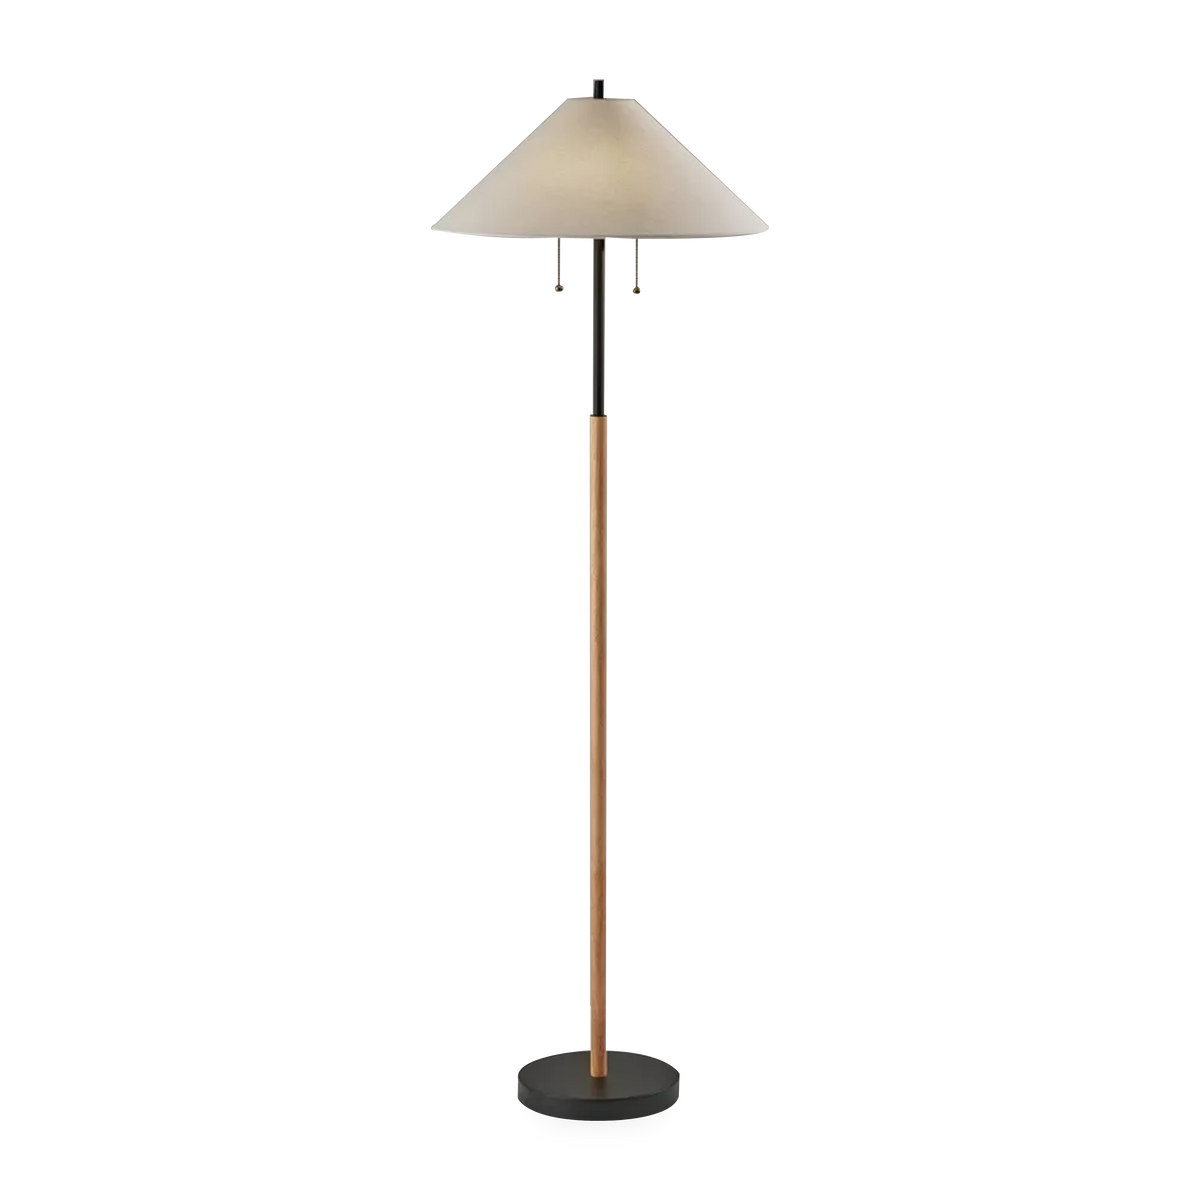 With its relaxed look and charm the Edie Floor Lamp makes a statement in any room.